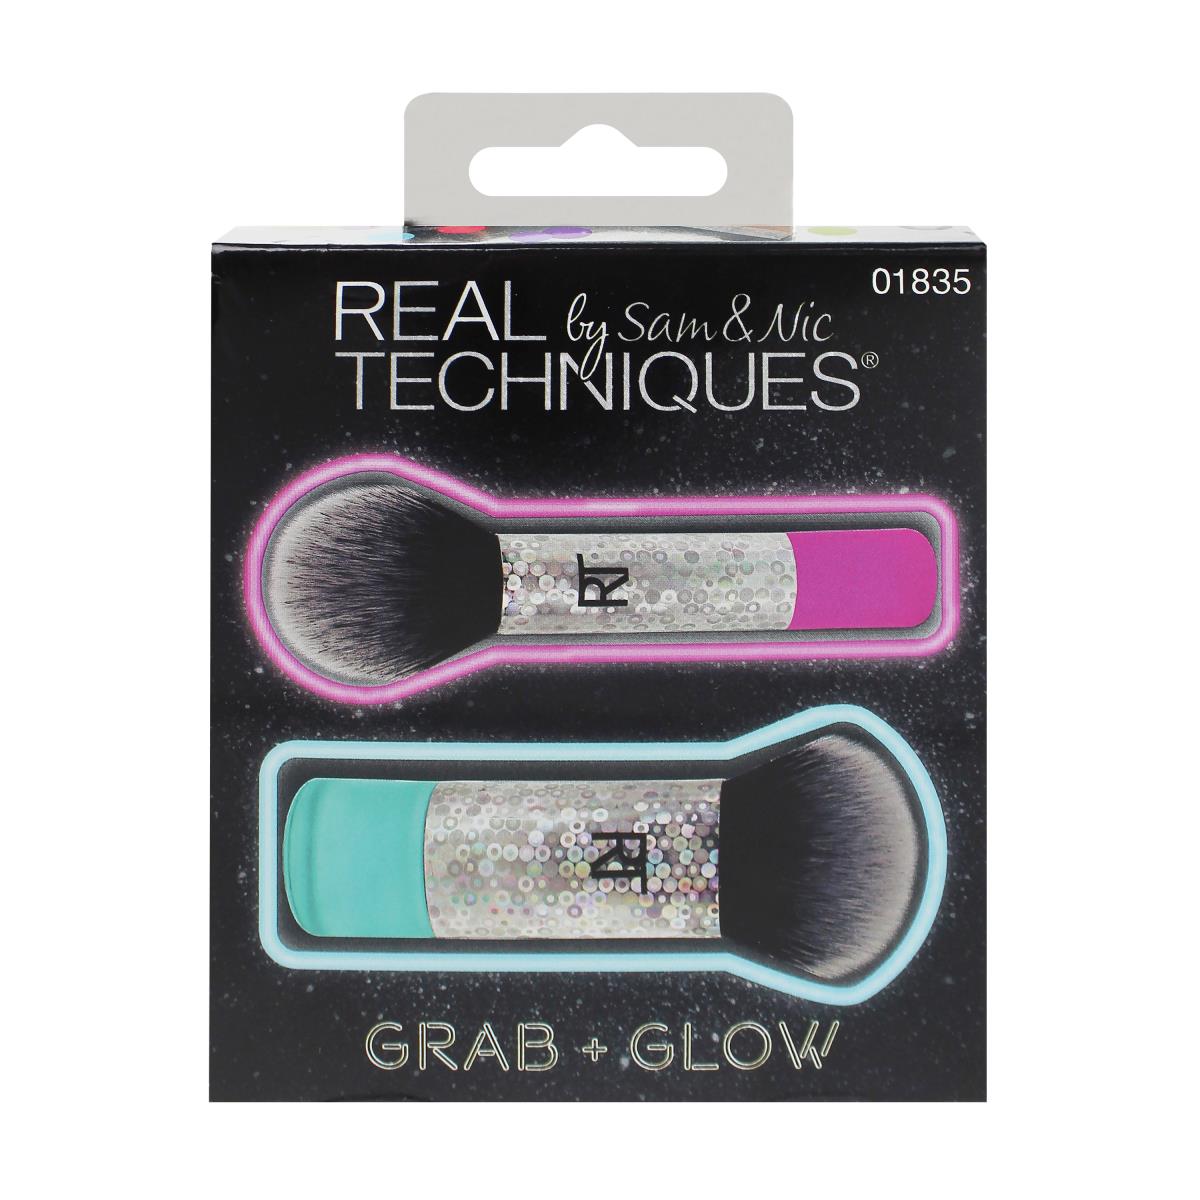 Real Techniques - Grab+Glow